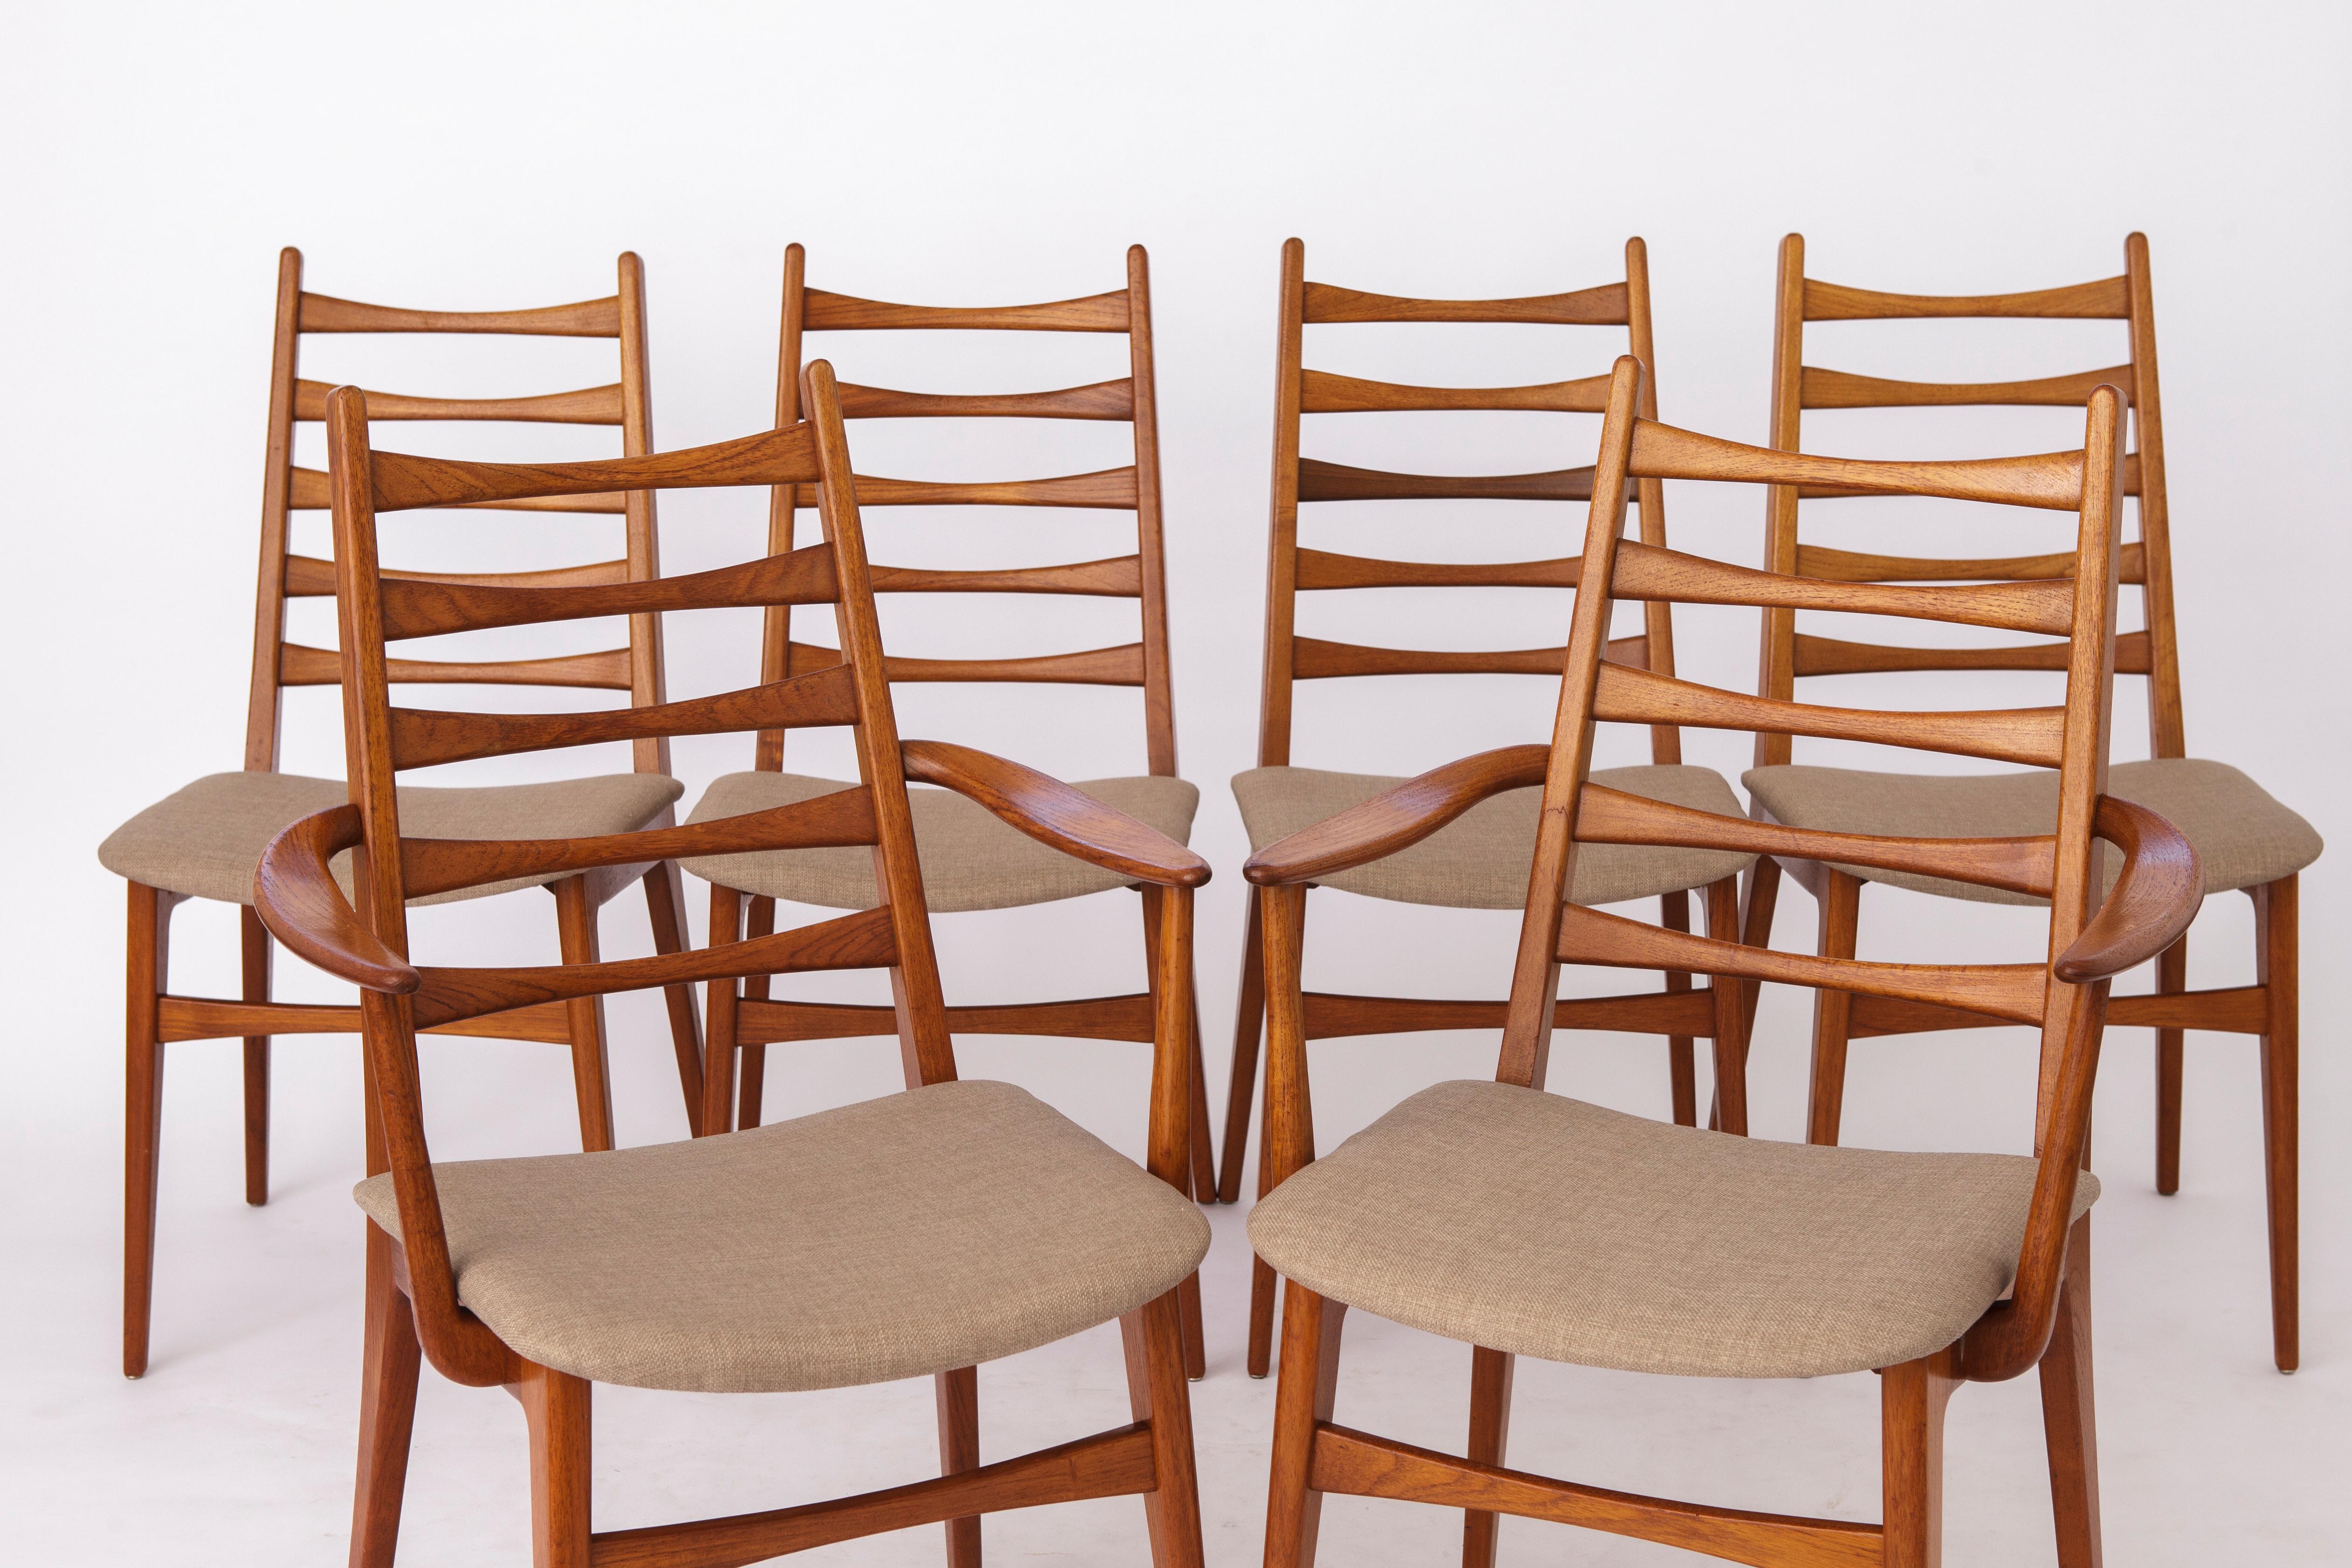 Set of 6 mid century dining chairs from the 1960s. 
Manufacturer: Benze, Germany 
Displayed price is for 6 chairs (2 armchairs + 4 side chairs)

Very good condition after restoration. Teak wood chair frames. 
No cracks or rapairs in the wood. All